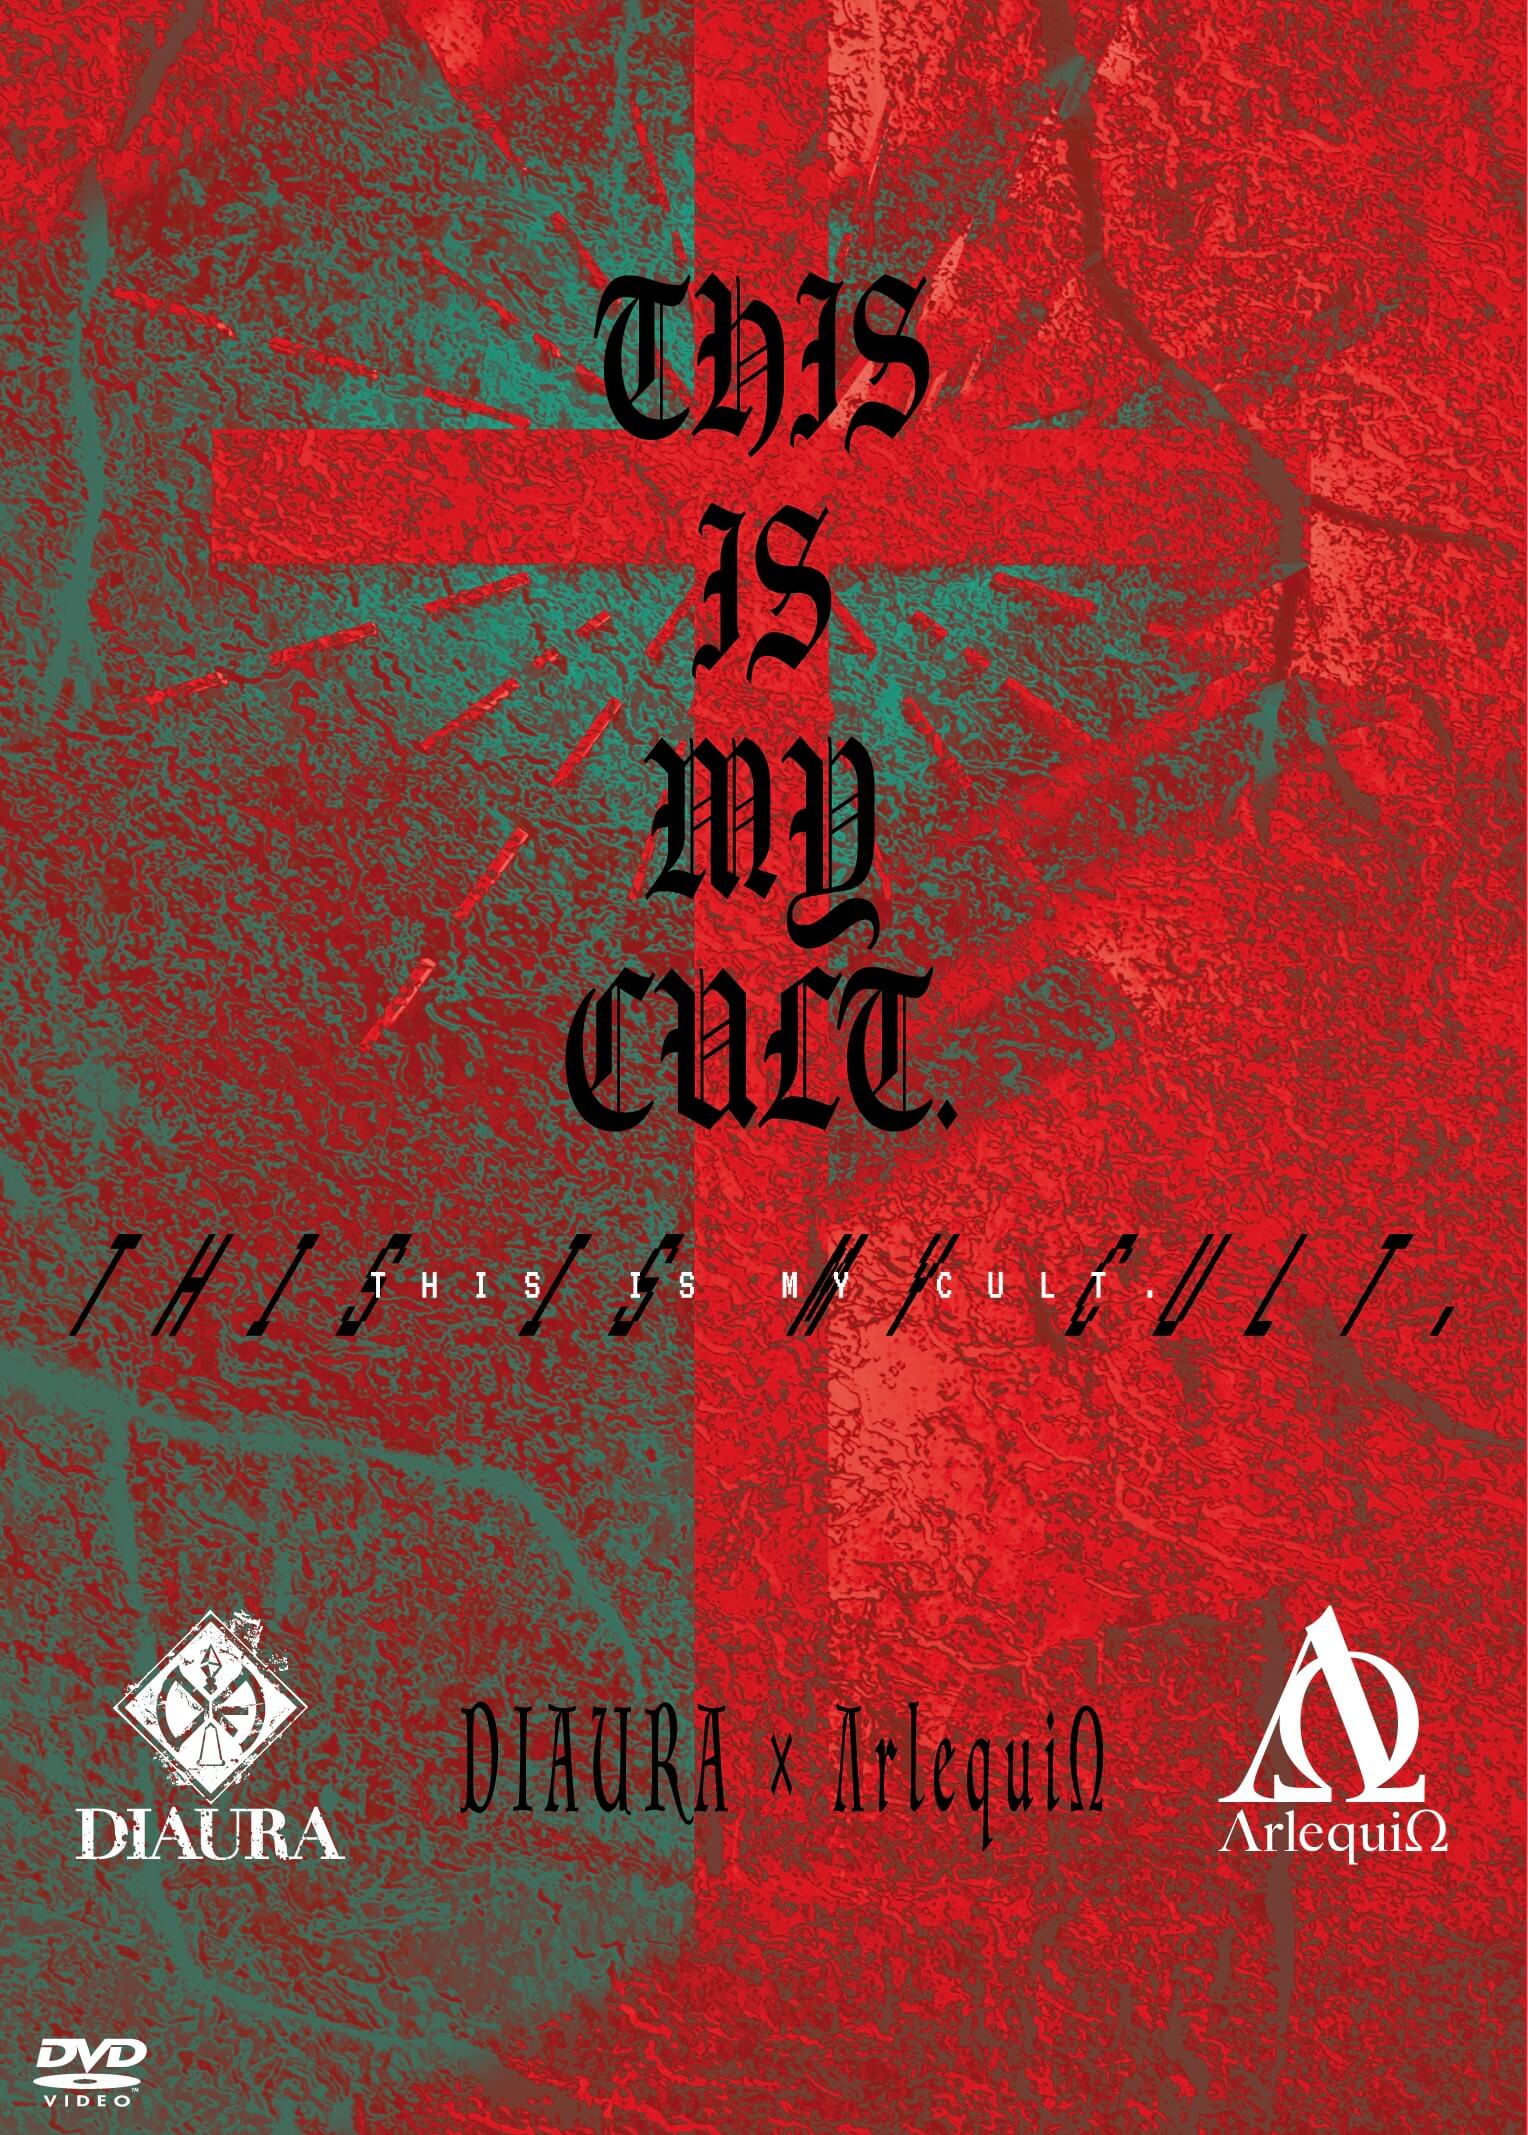 「DIAURA×ΛrlequiΩ 「THIS IS MY CULT.」」